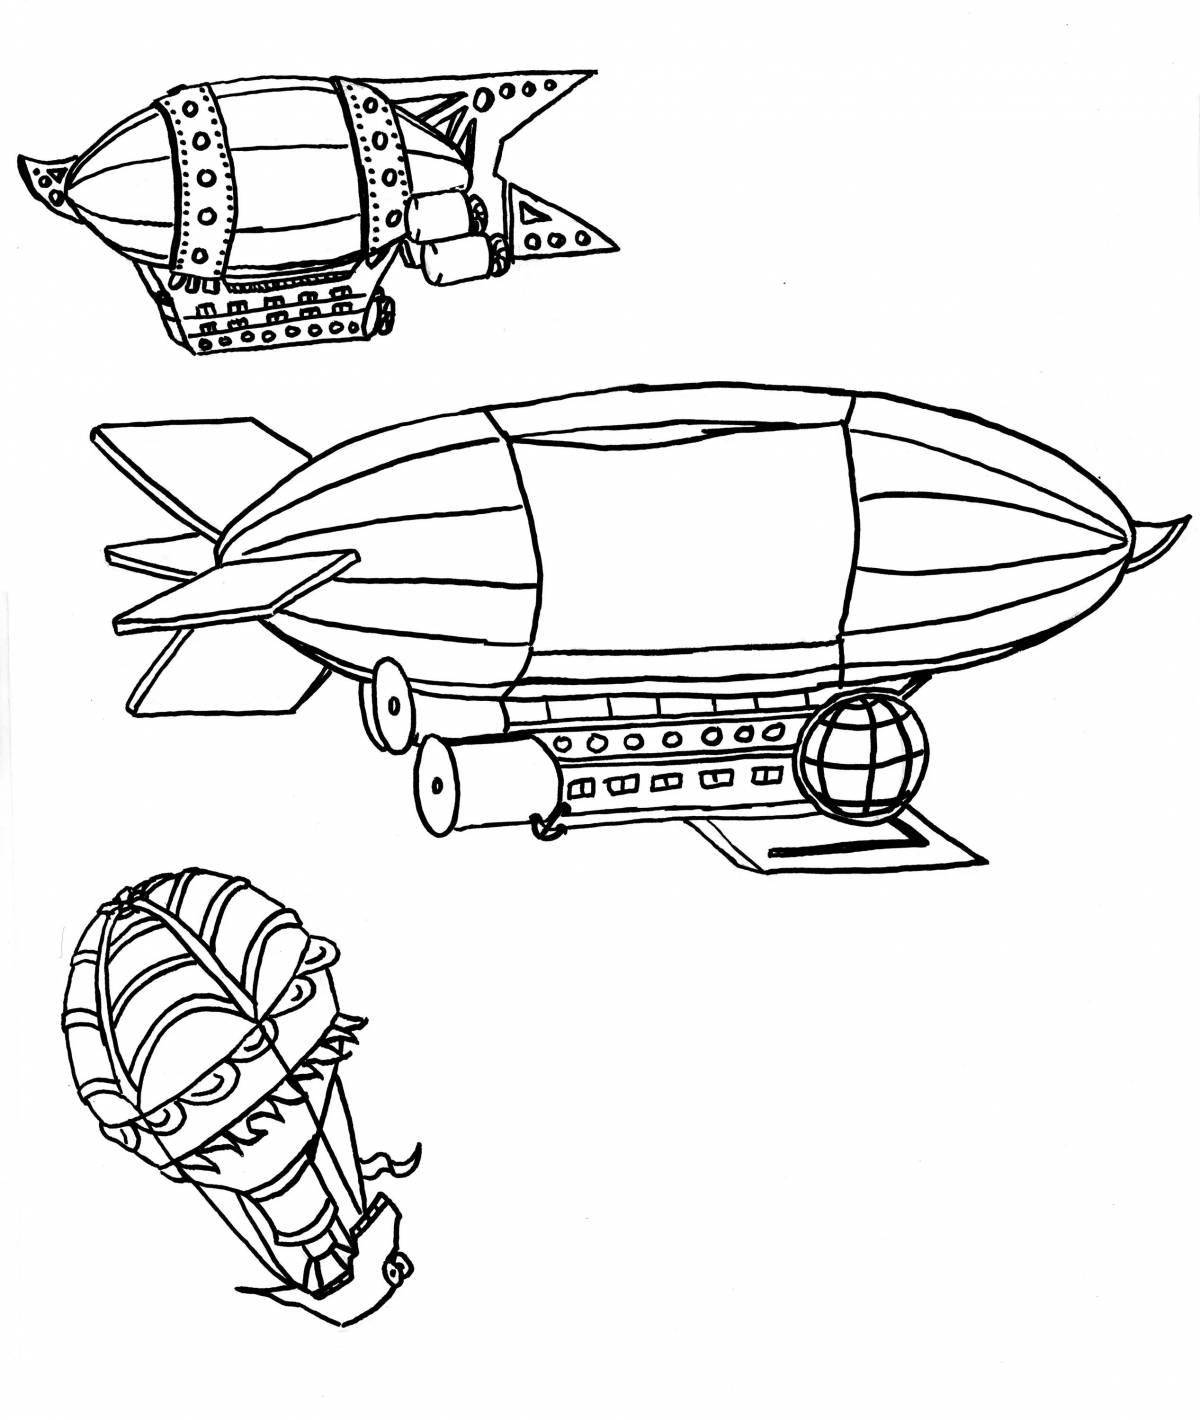 Adorable airship coloring book for kids